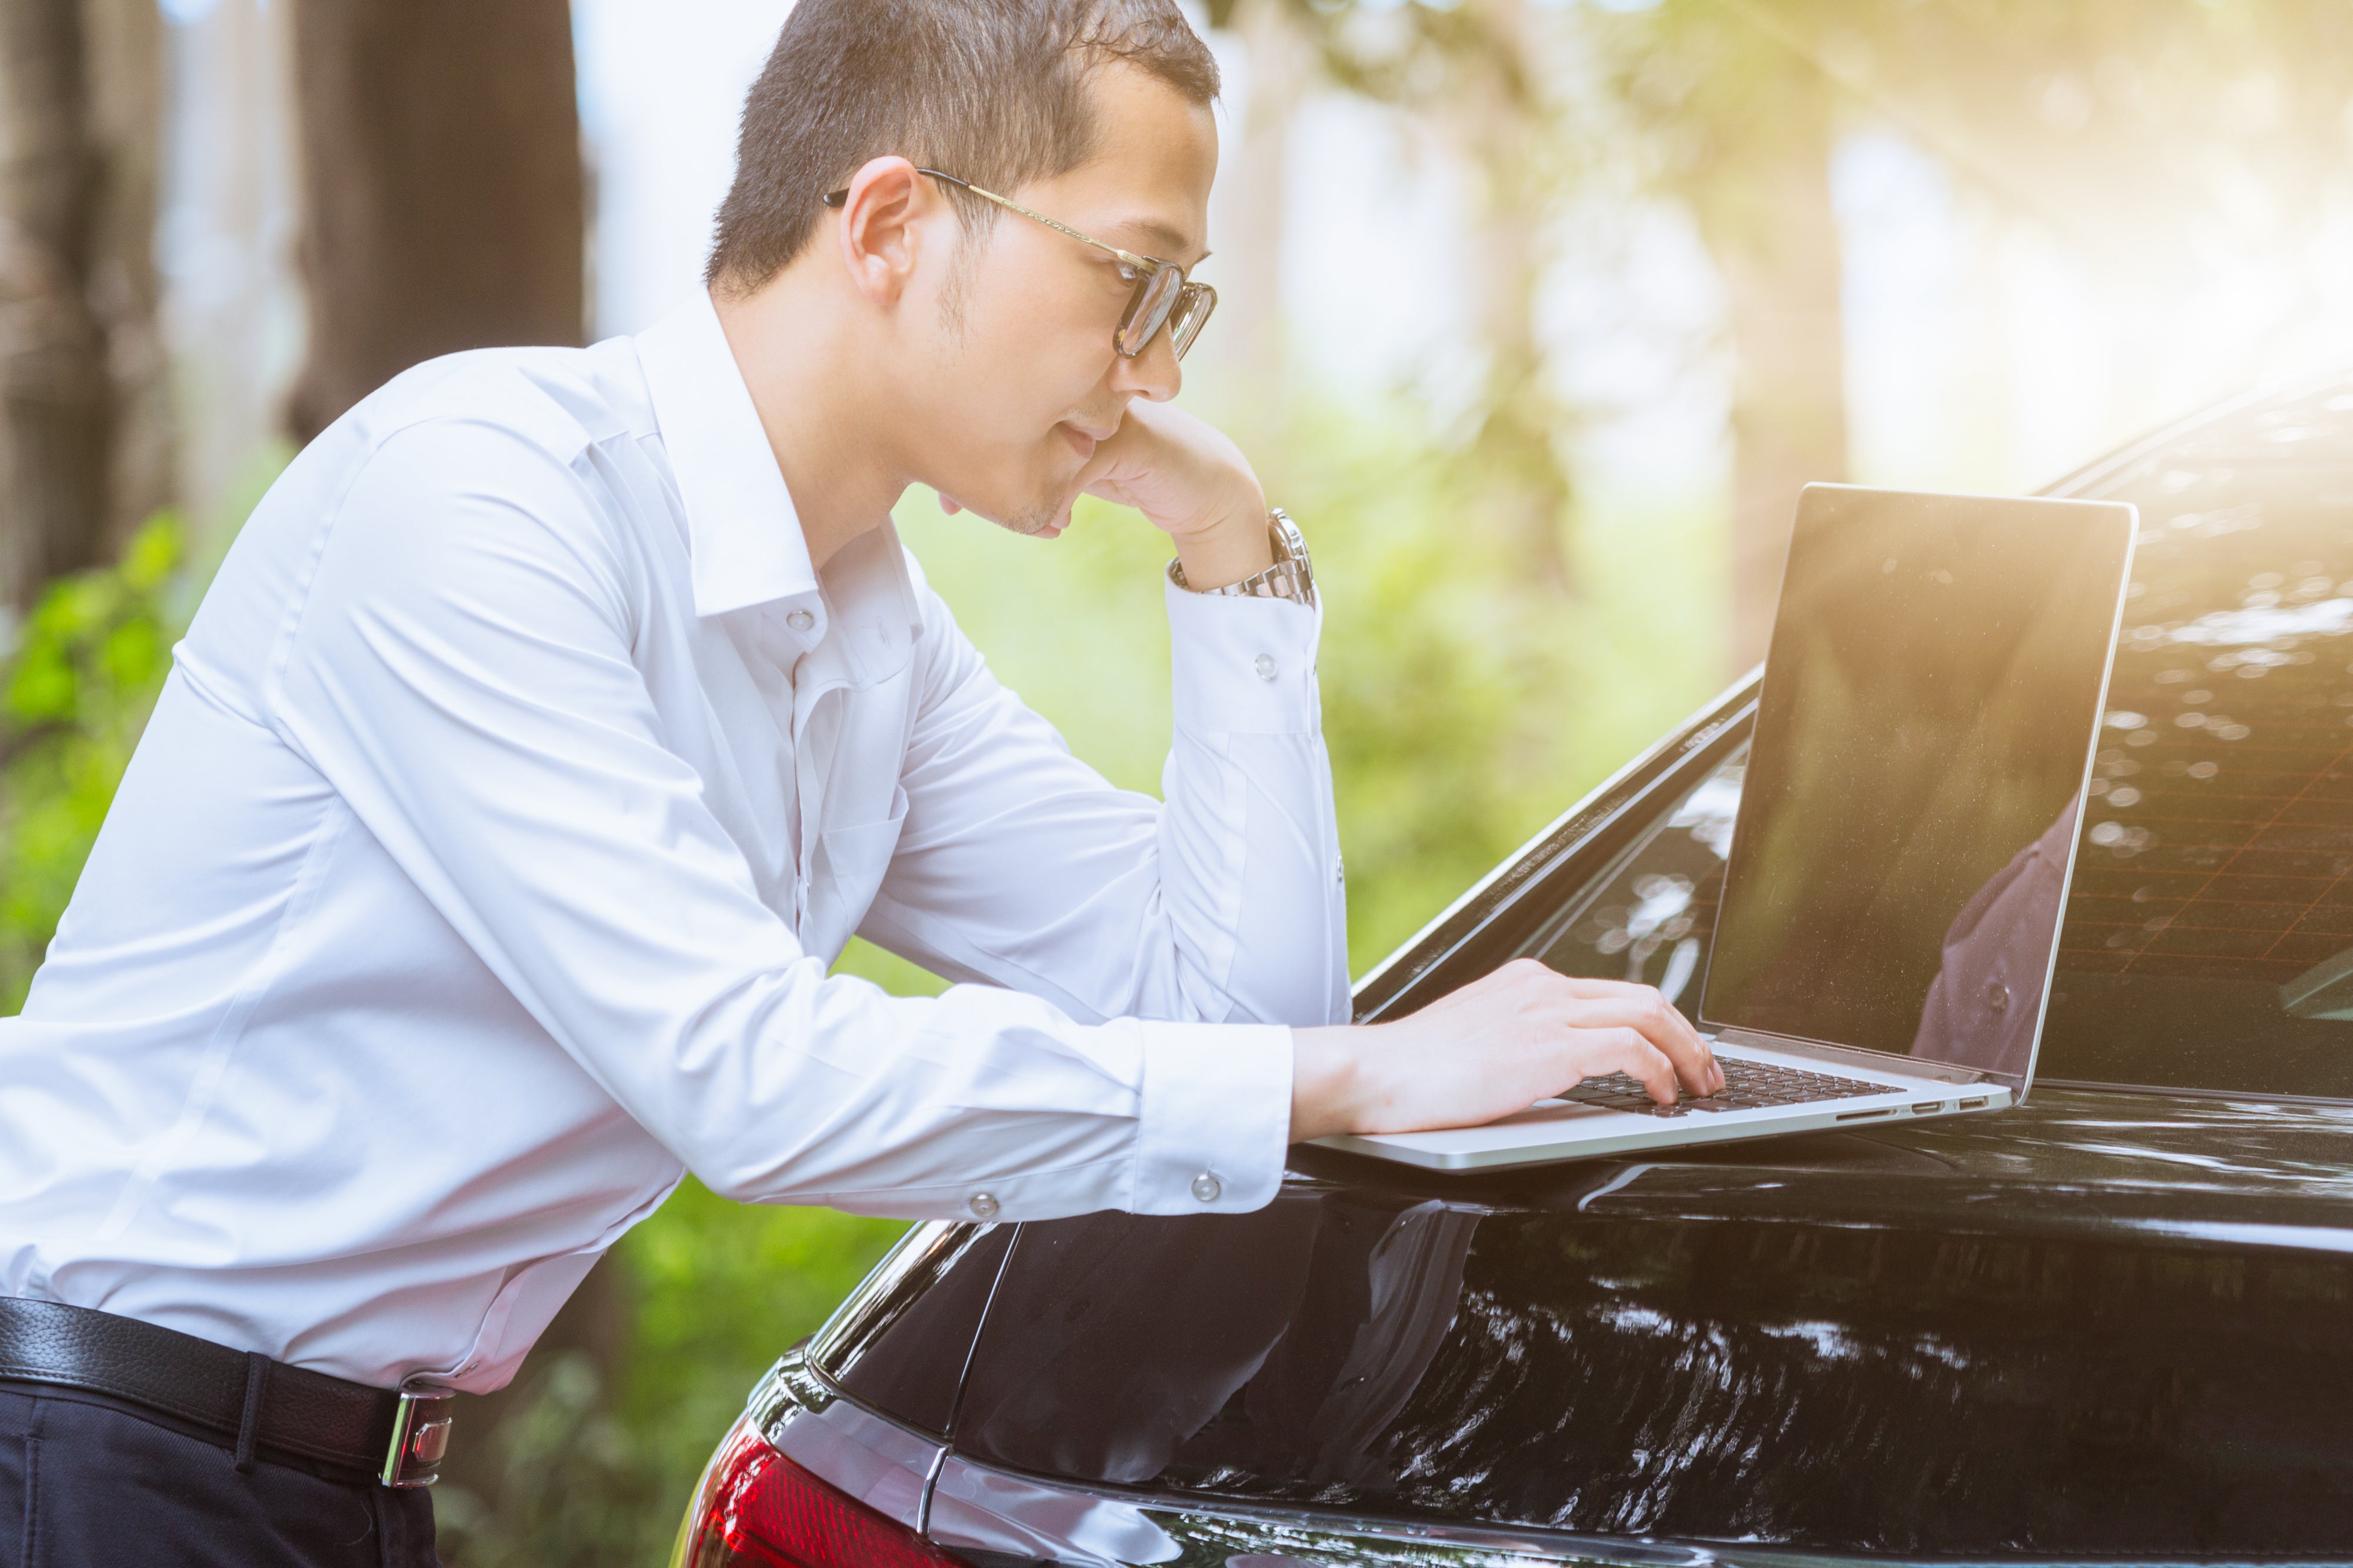 Starting Your Journey in Auto Detailing: A Beginner's Guide